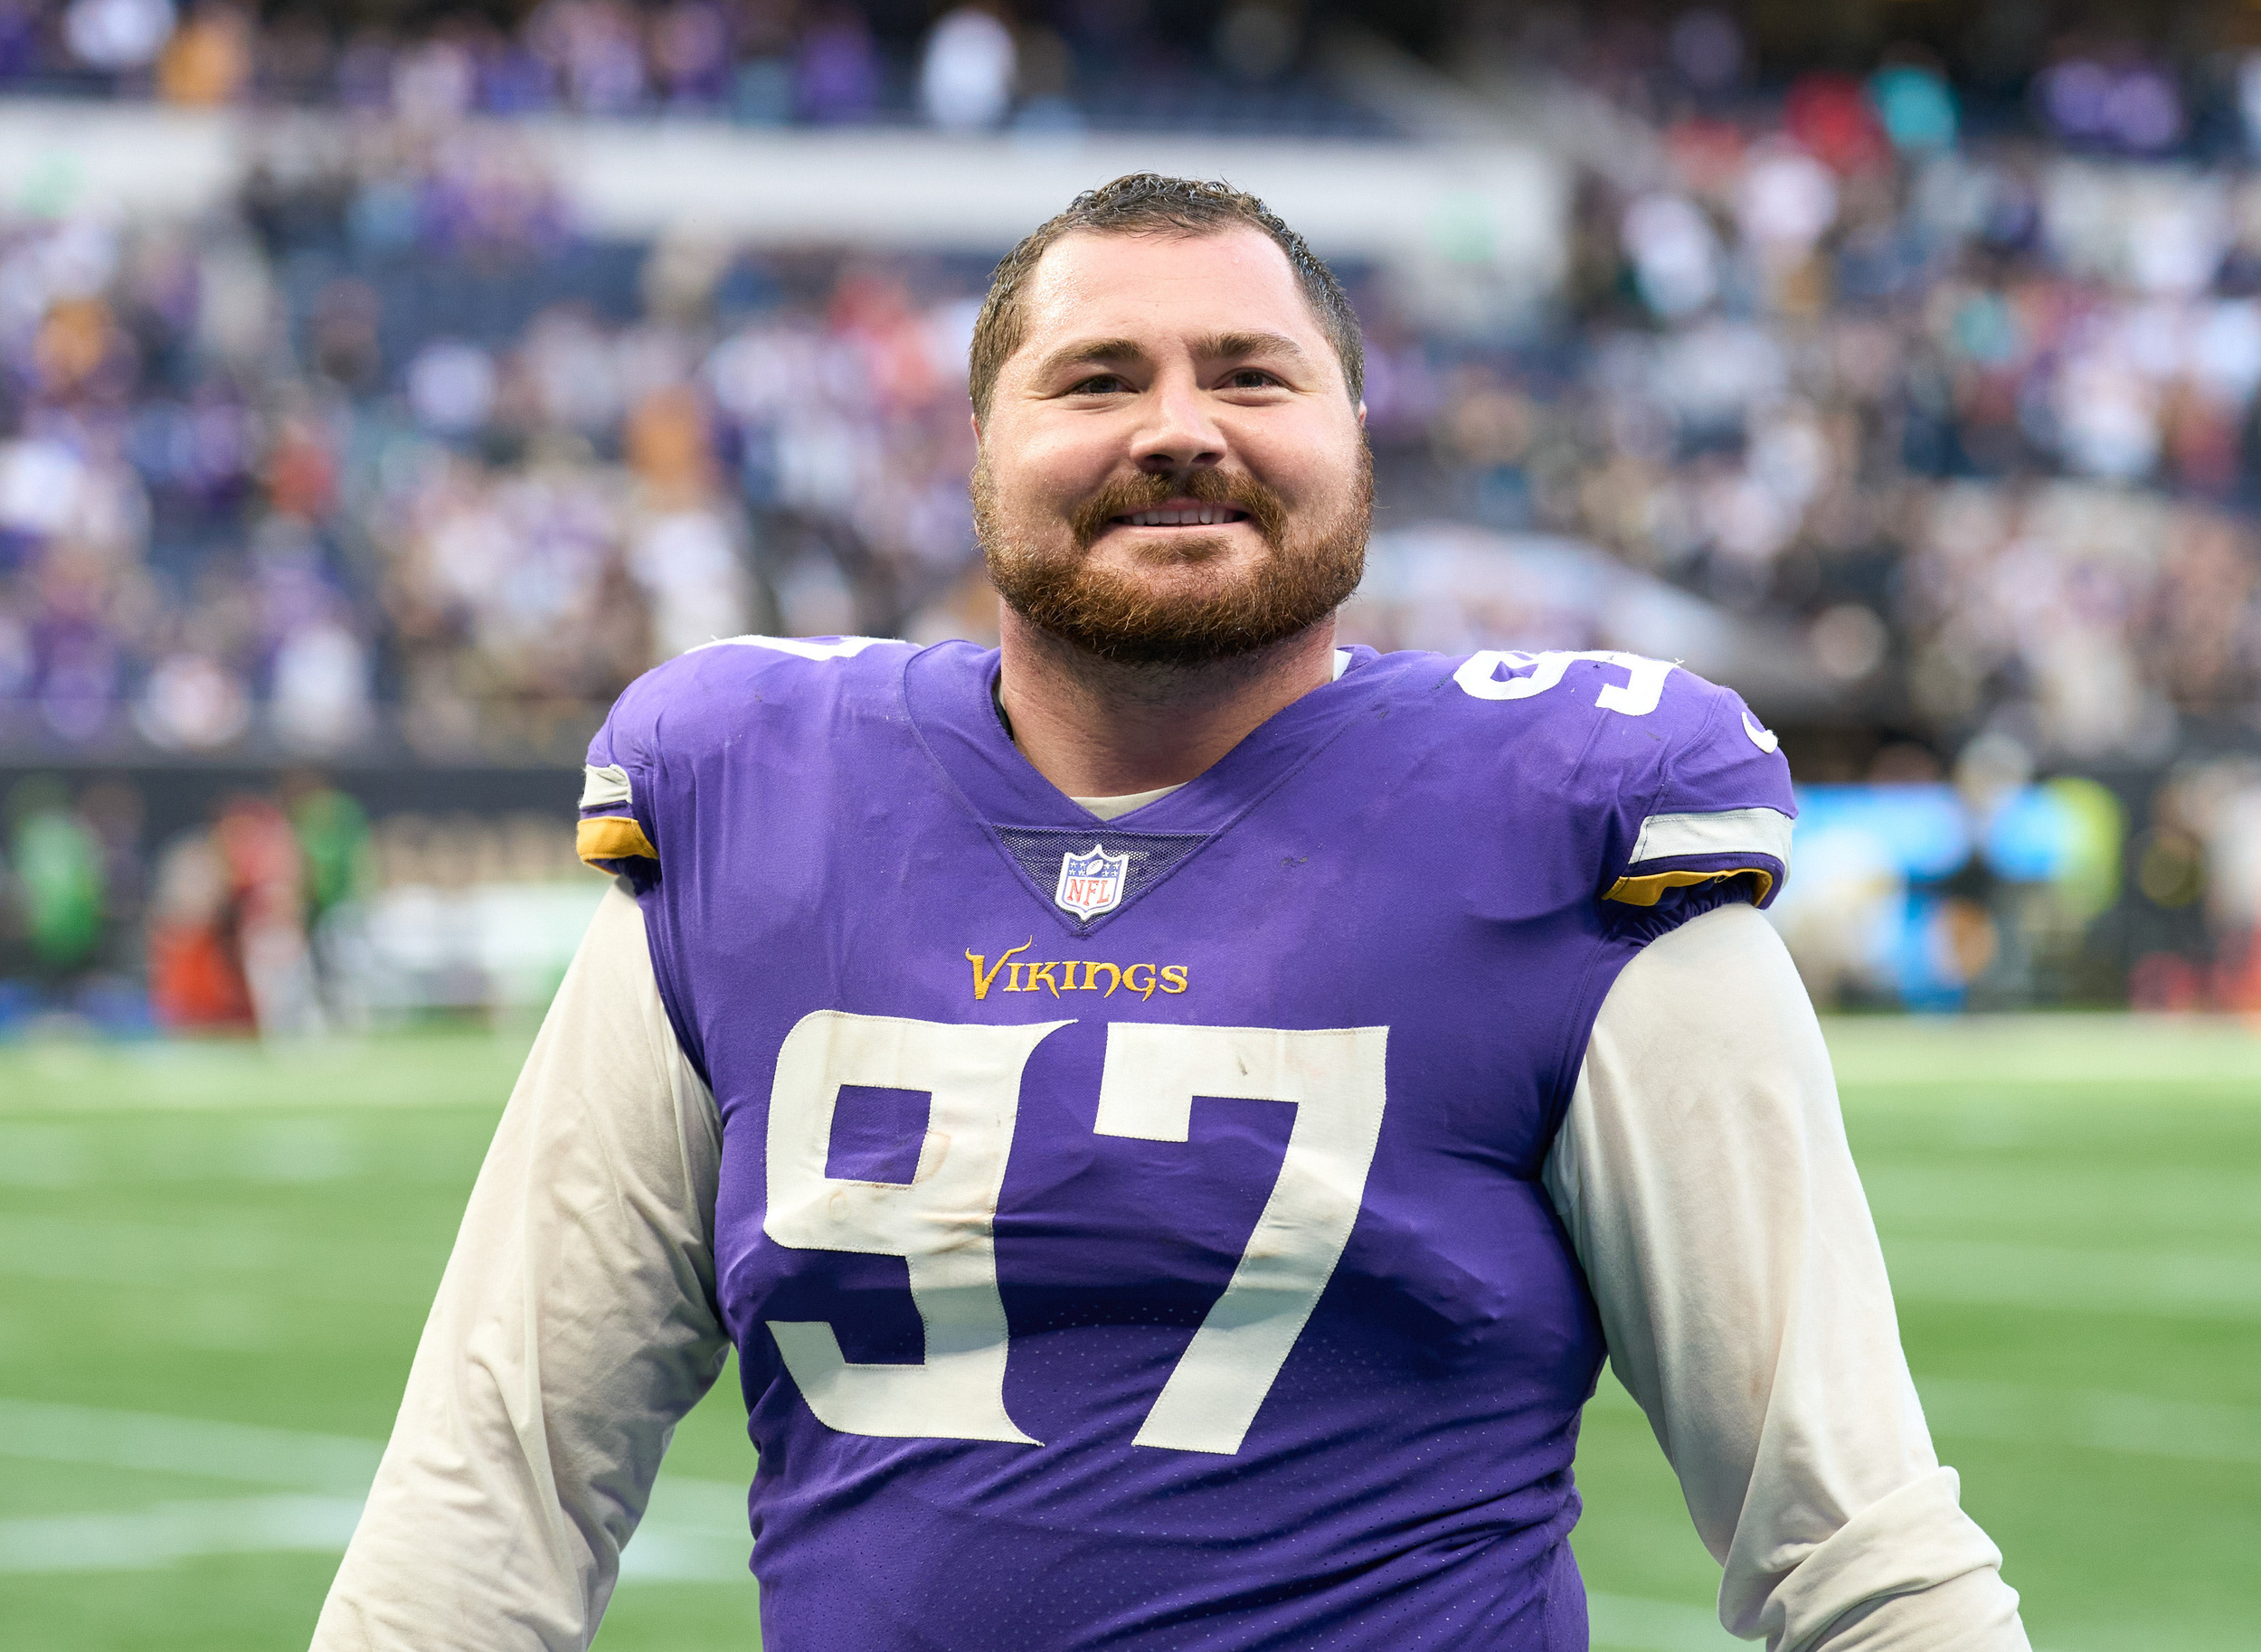 vikings veteran dt says team is lacking one key component